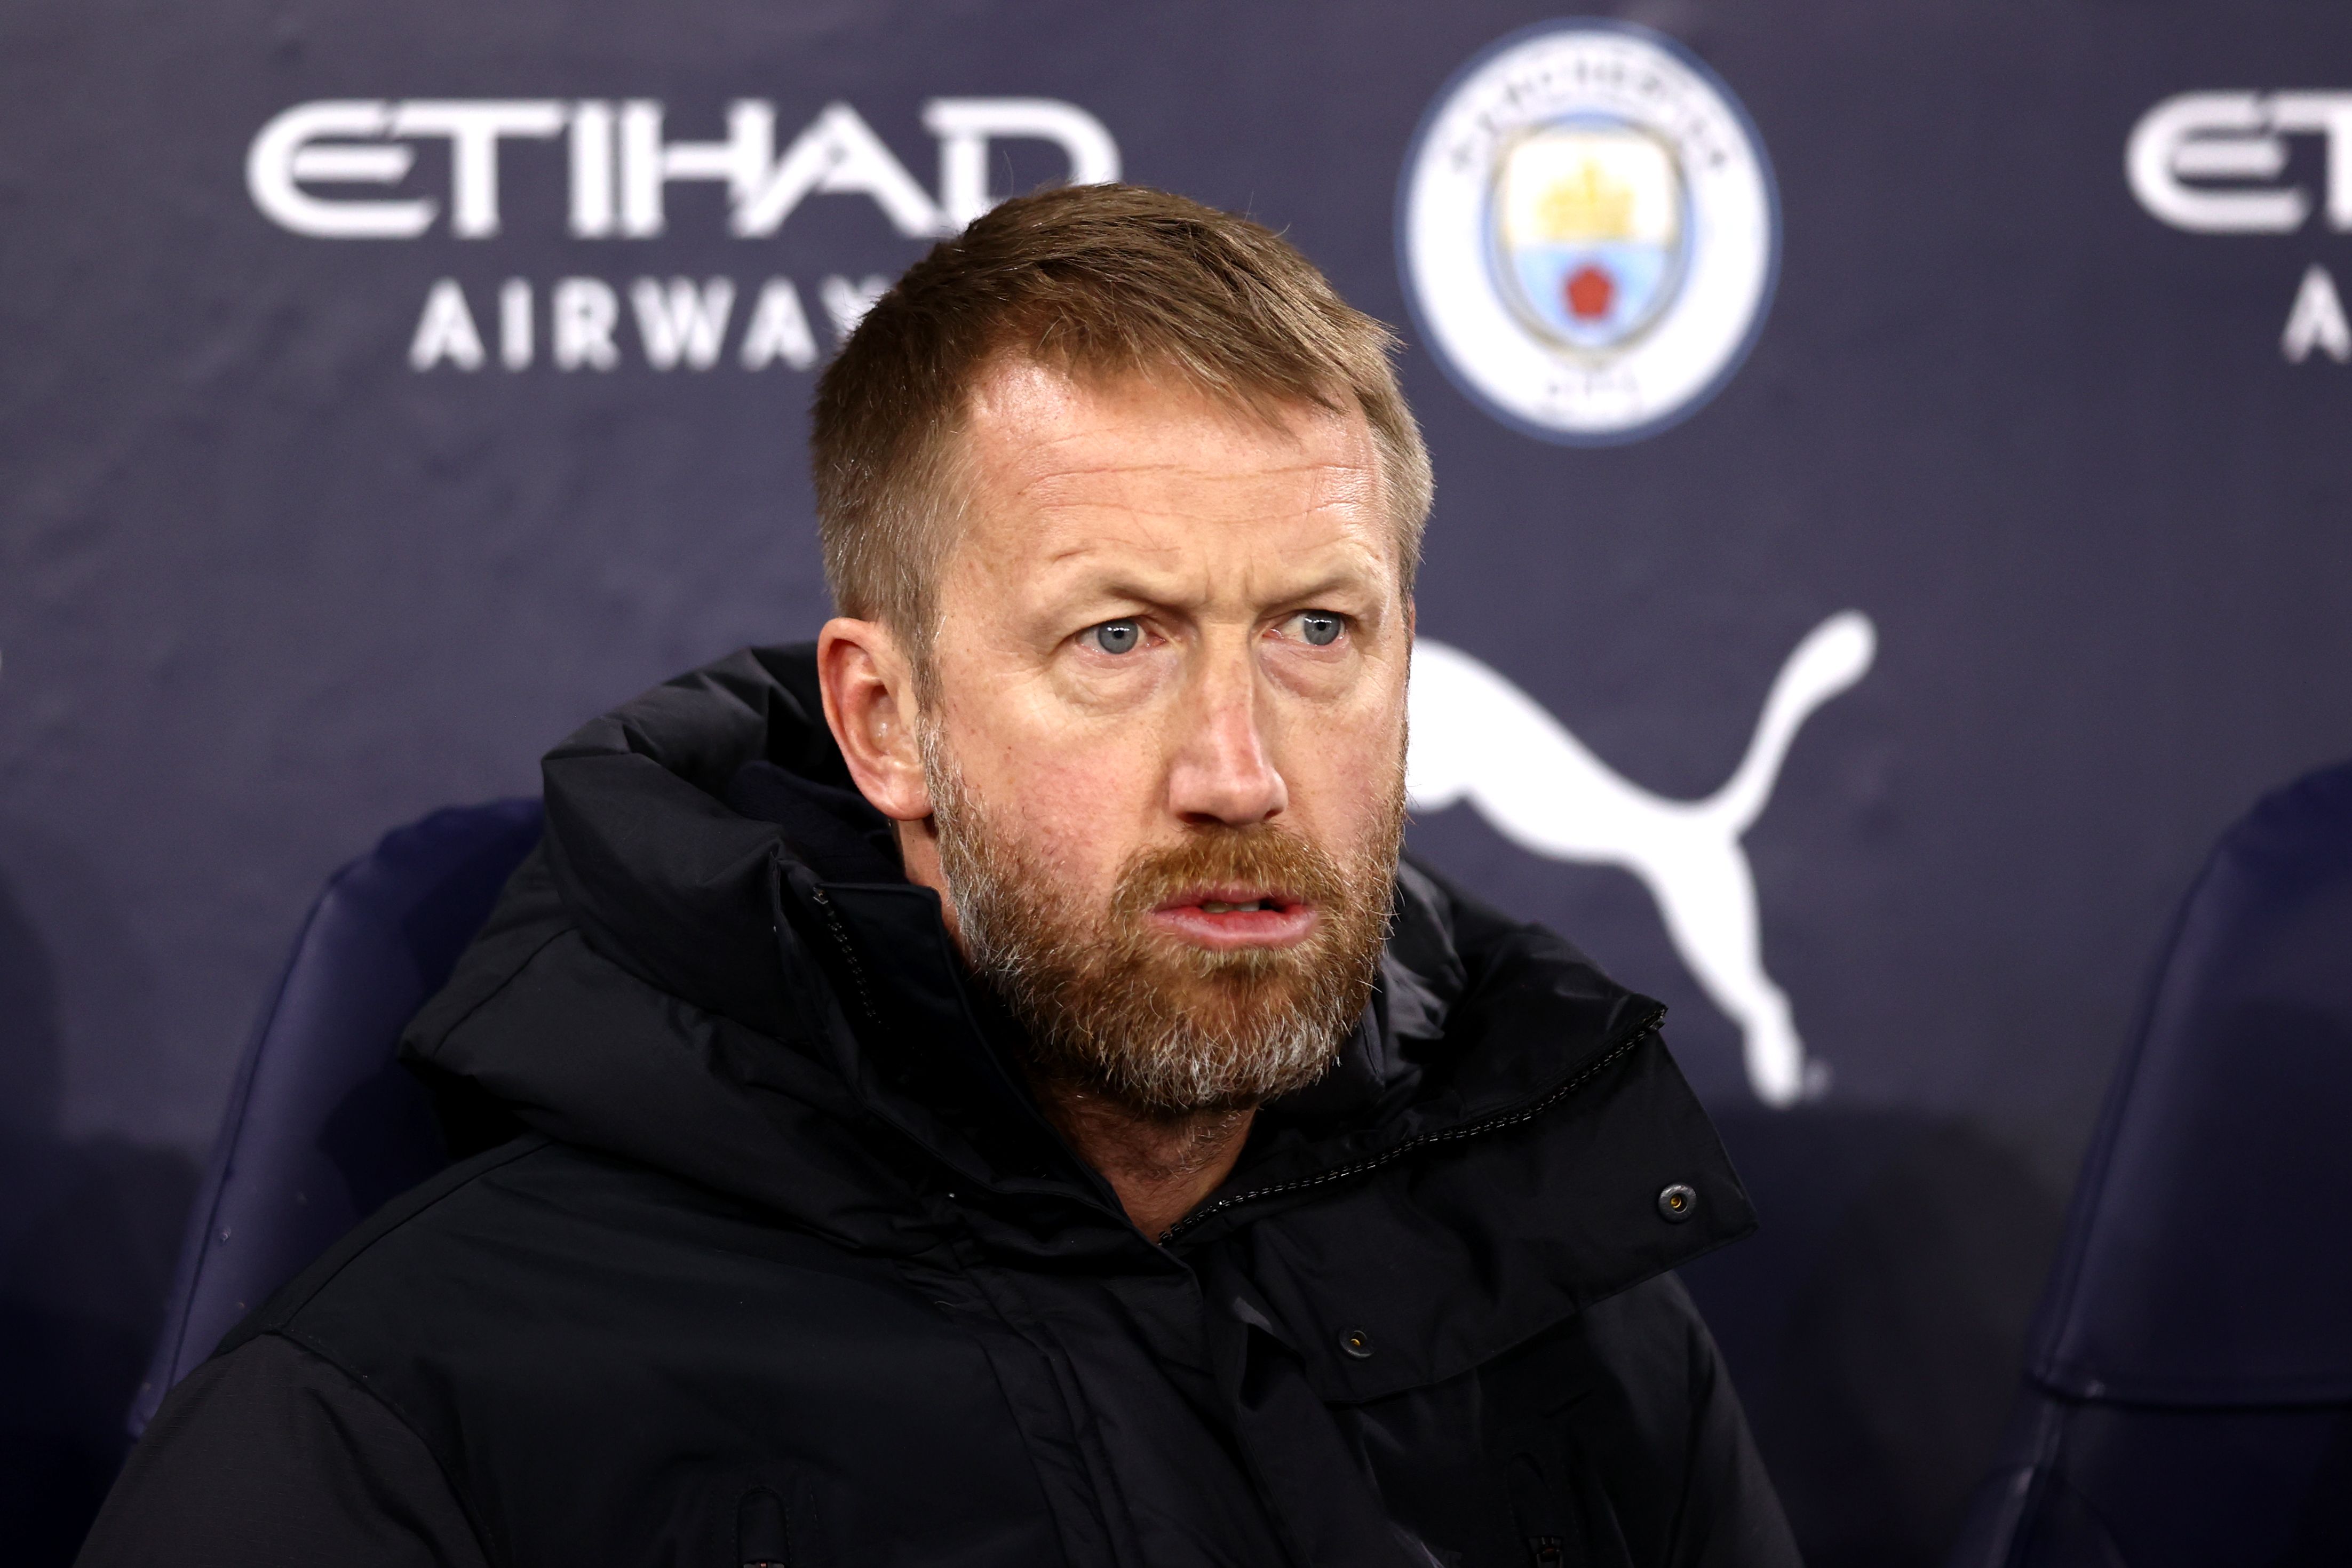 Graham Potter appears to be losing Chelsea fans' confidence